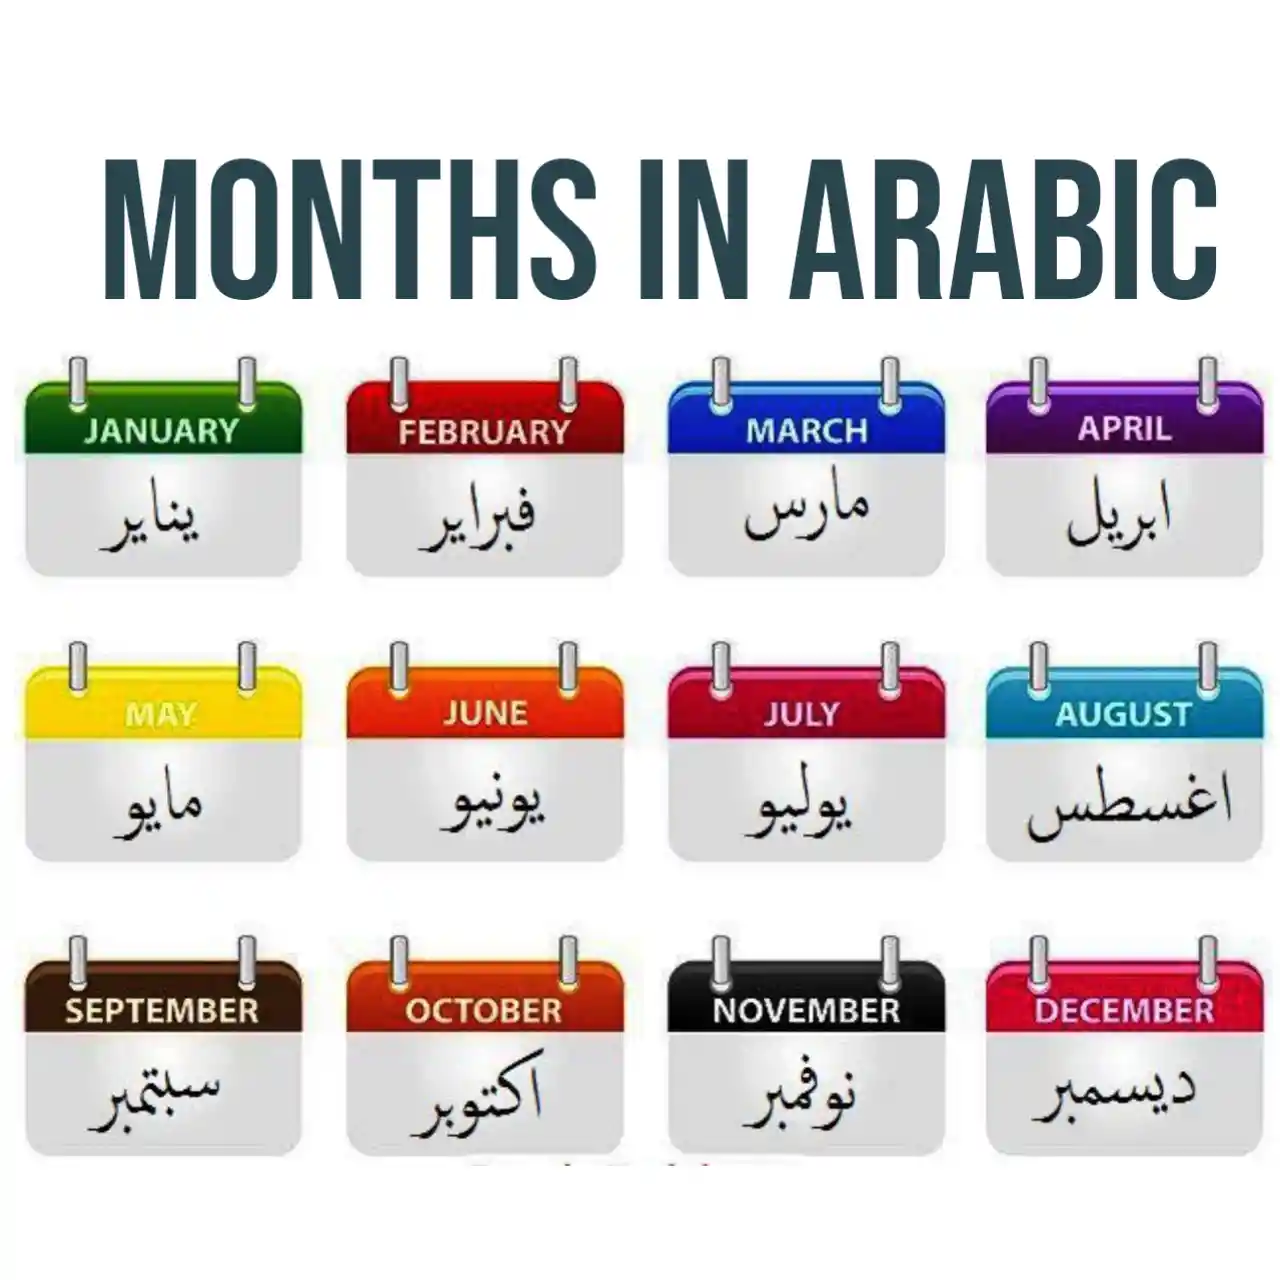 12 Months In Arabic Beginner's Guide To The Islamic Months